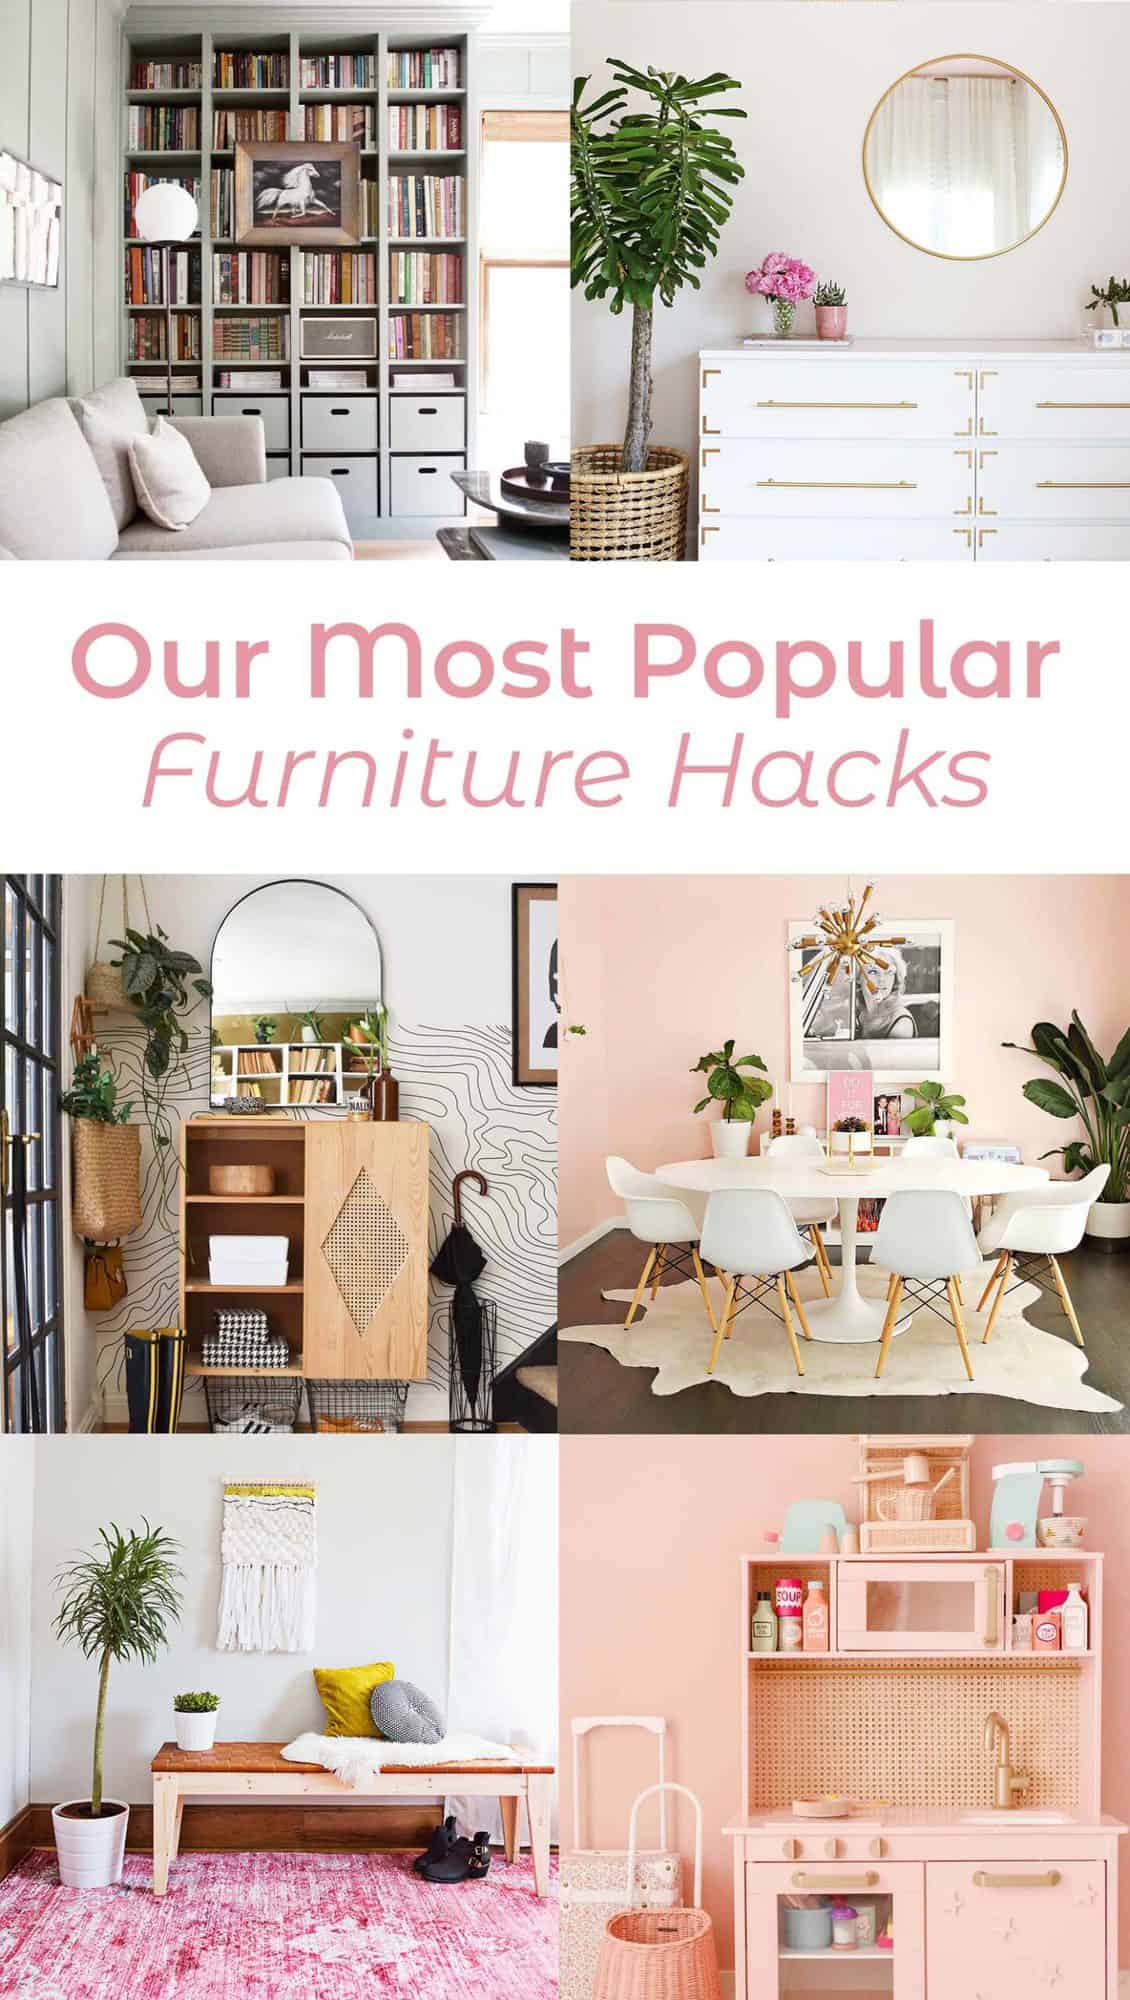 https://abeautifulmess.com/wp-content/uploads/2022/03/Our-most-popular-furniture-hacks--scaled.jpg